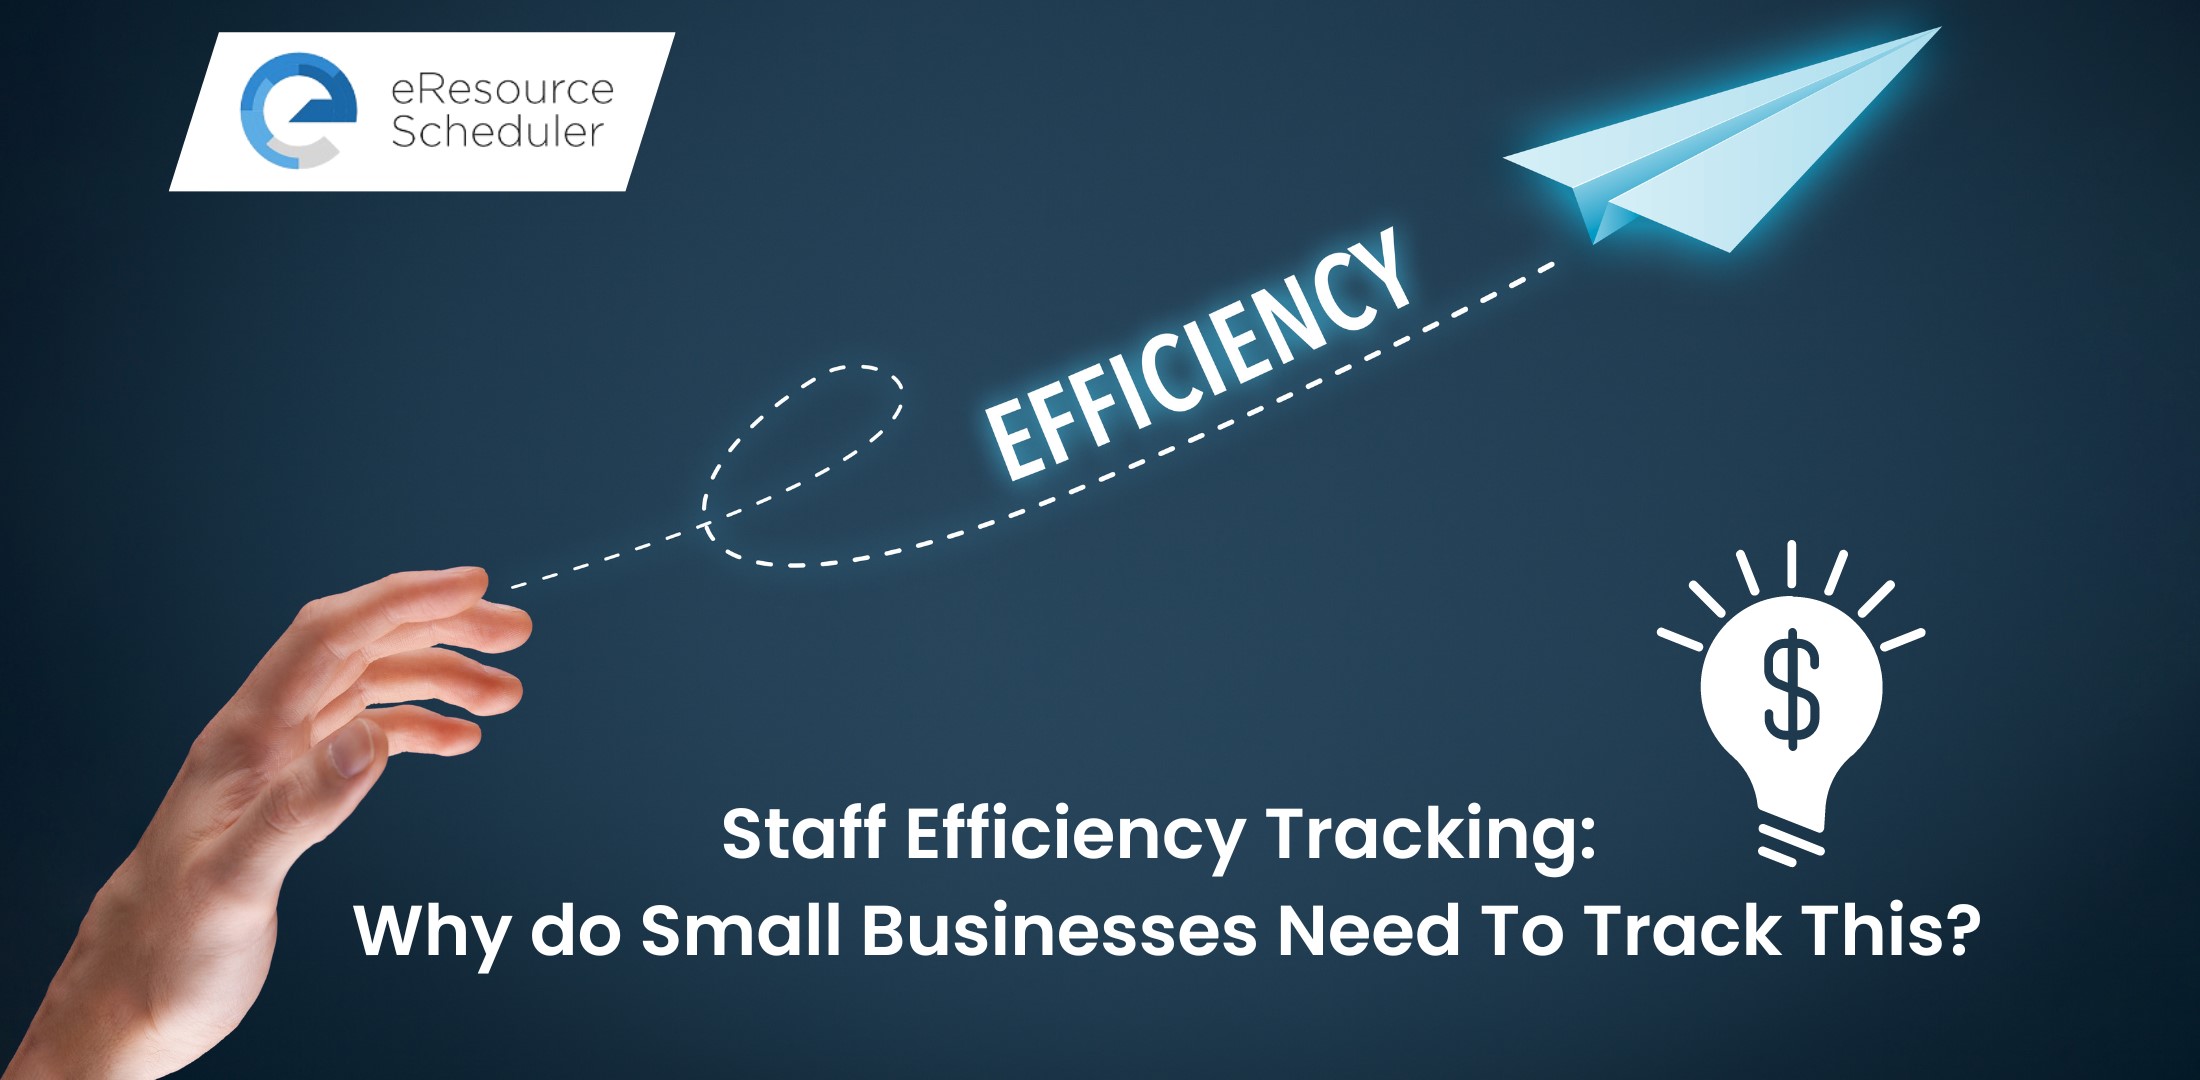 Staff Efficiency Tracking: Why Do Small Businesses Need to Track This